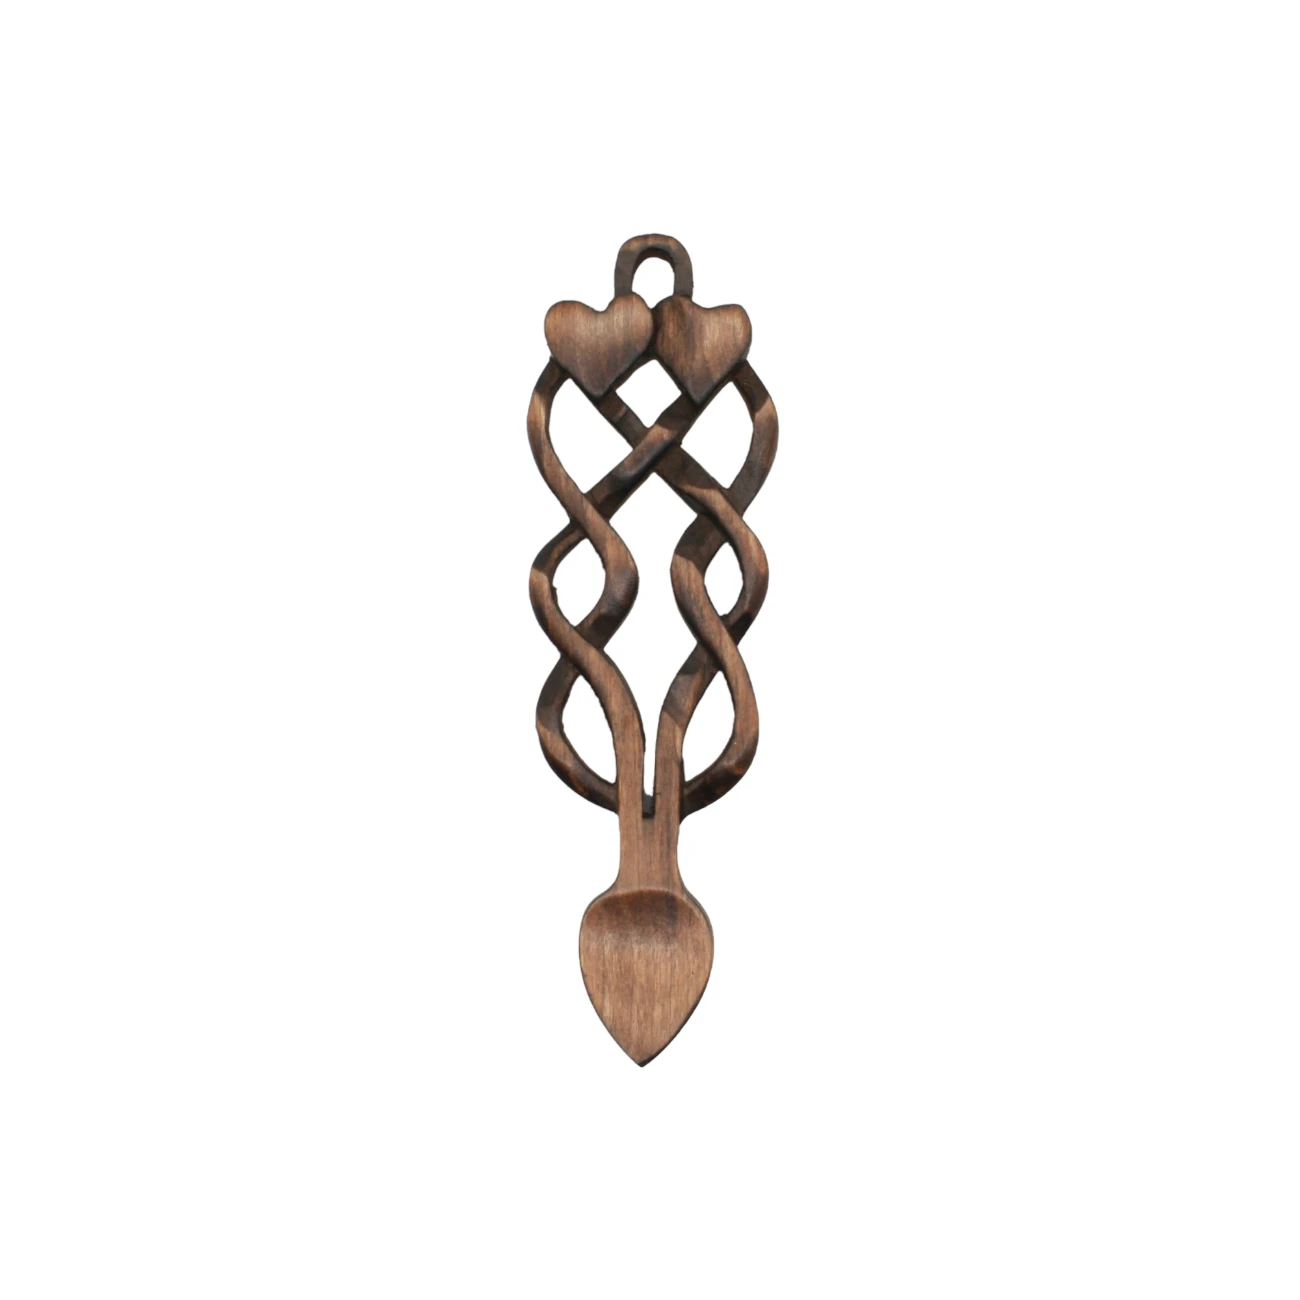 An image of a lovespoon titled Hearts & Twisted stem